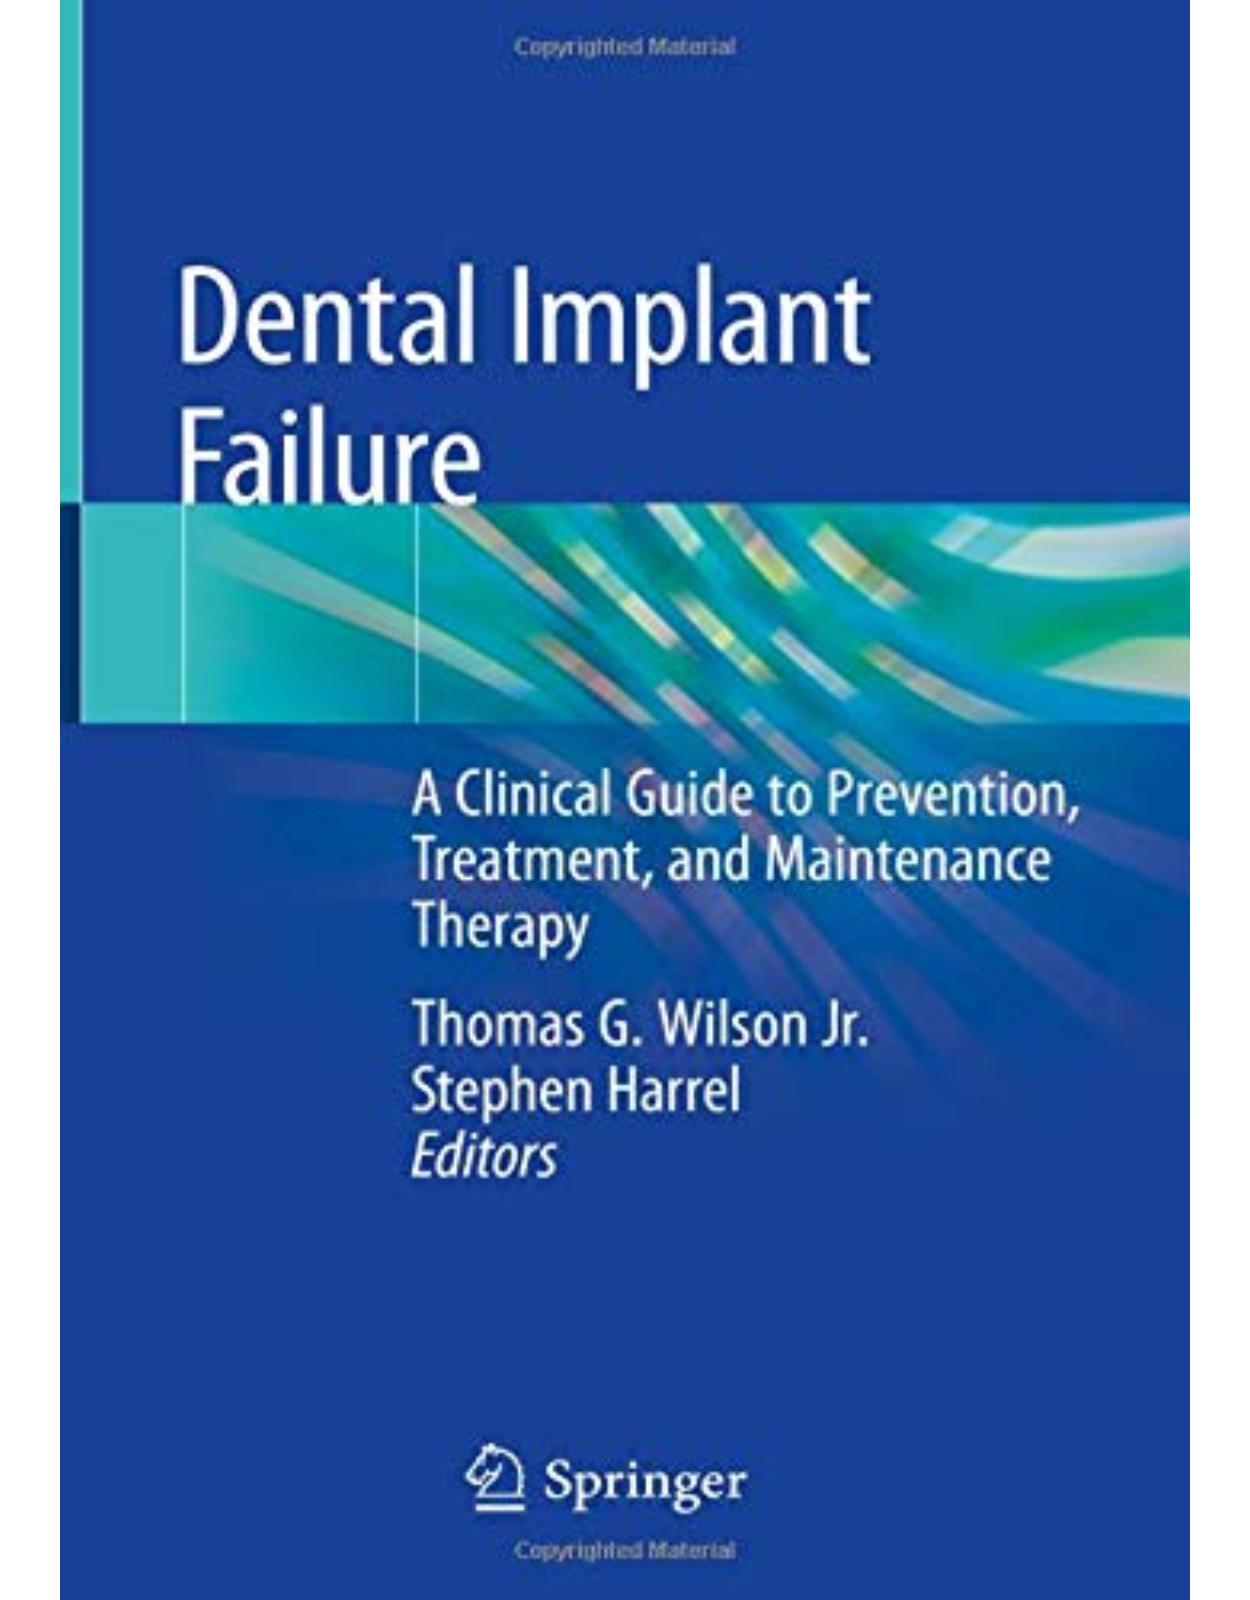 Dental Implant Failure. A Clinical Guide to Prevention, Treatment, and Maintenance Therapy